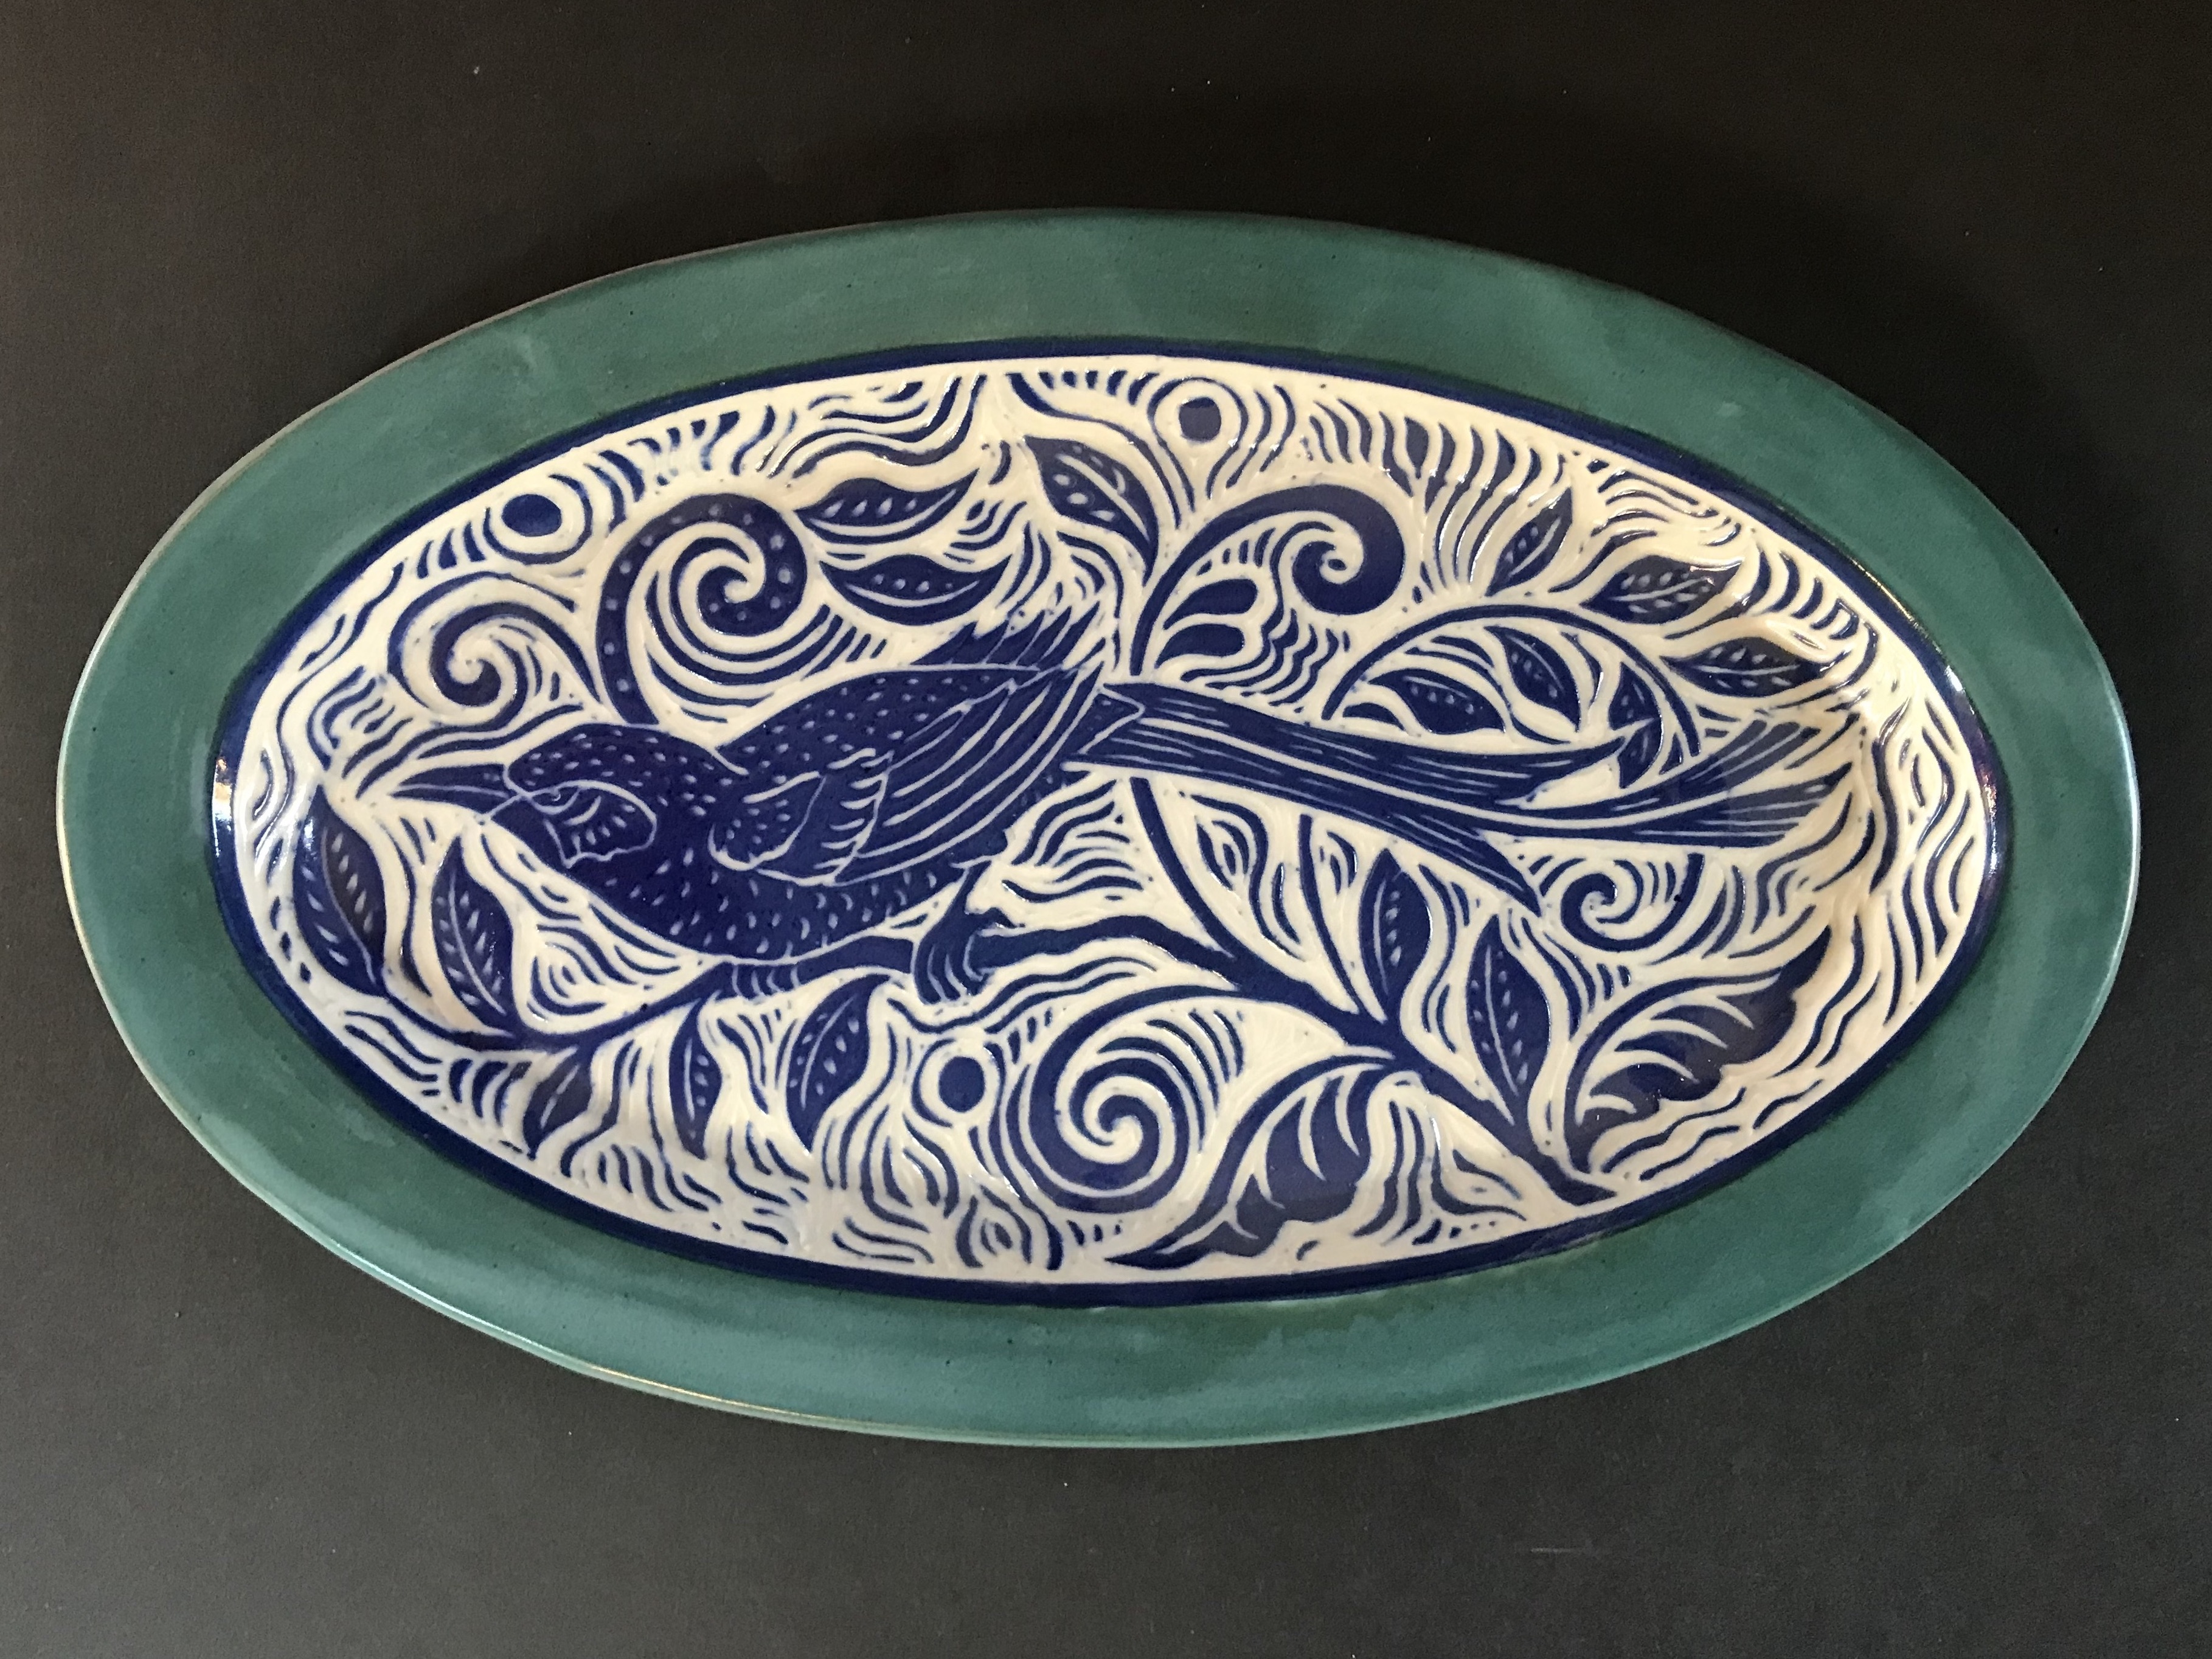 Ceramic Oval Serving Dish in Cobalt Blue, White, and Turquoise with Stylized Magpie Design